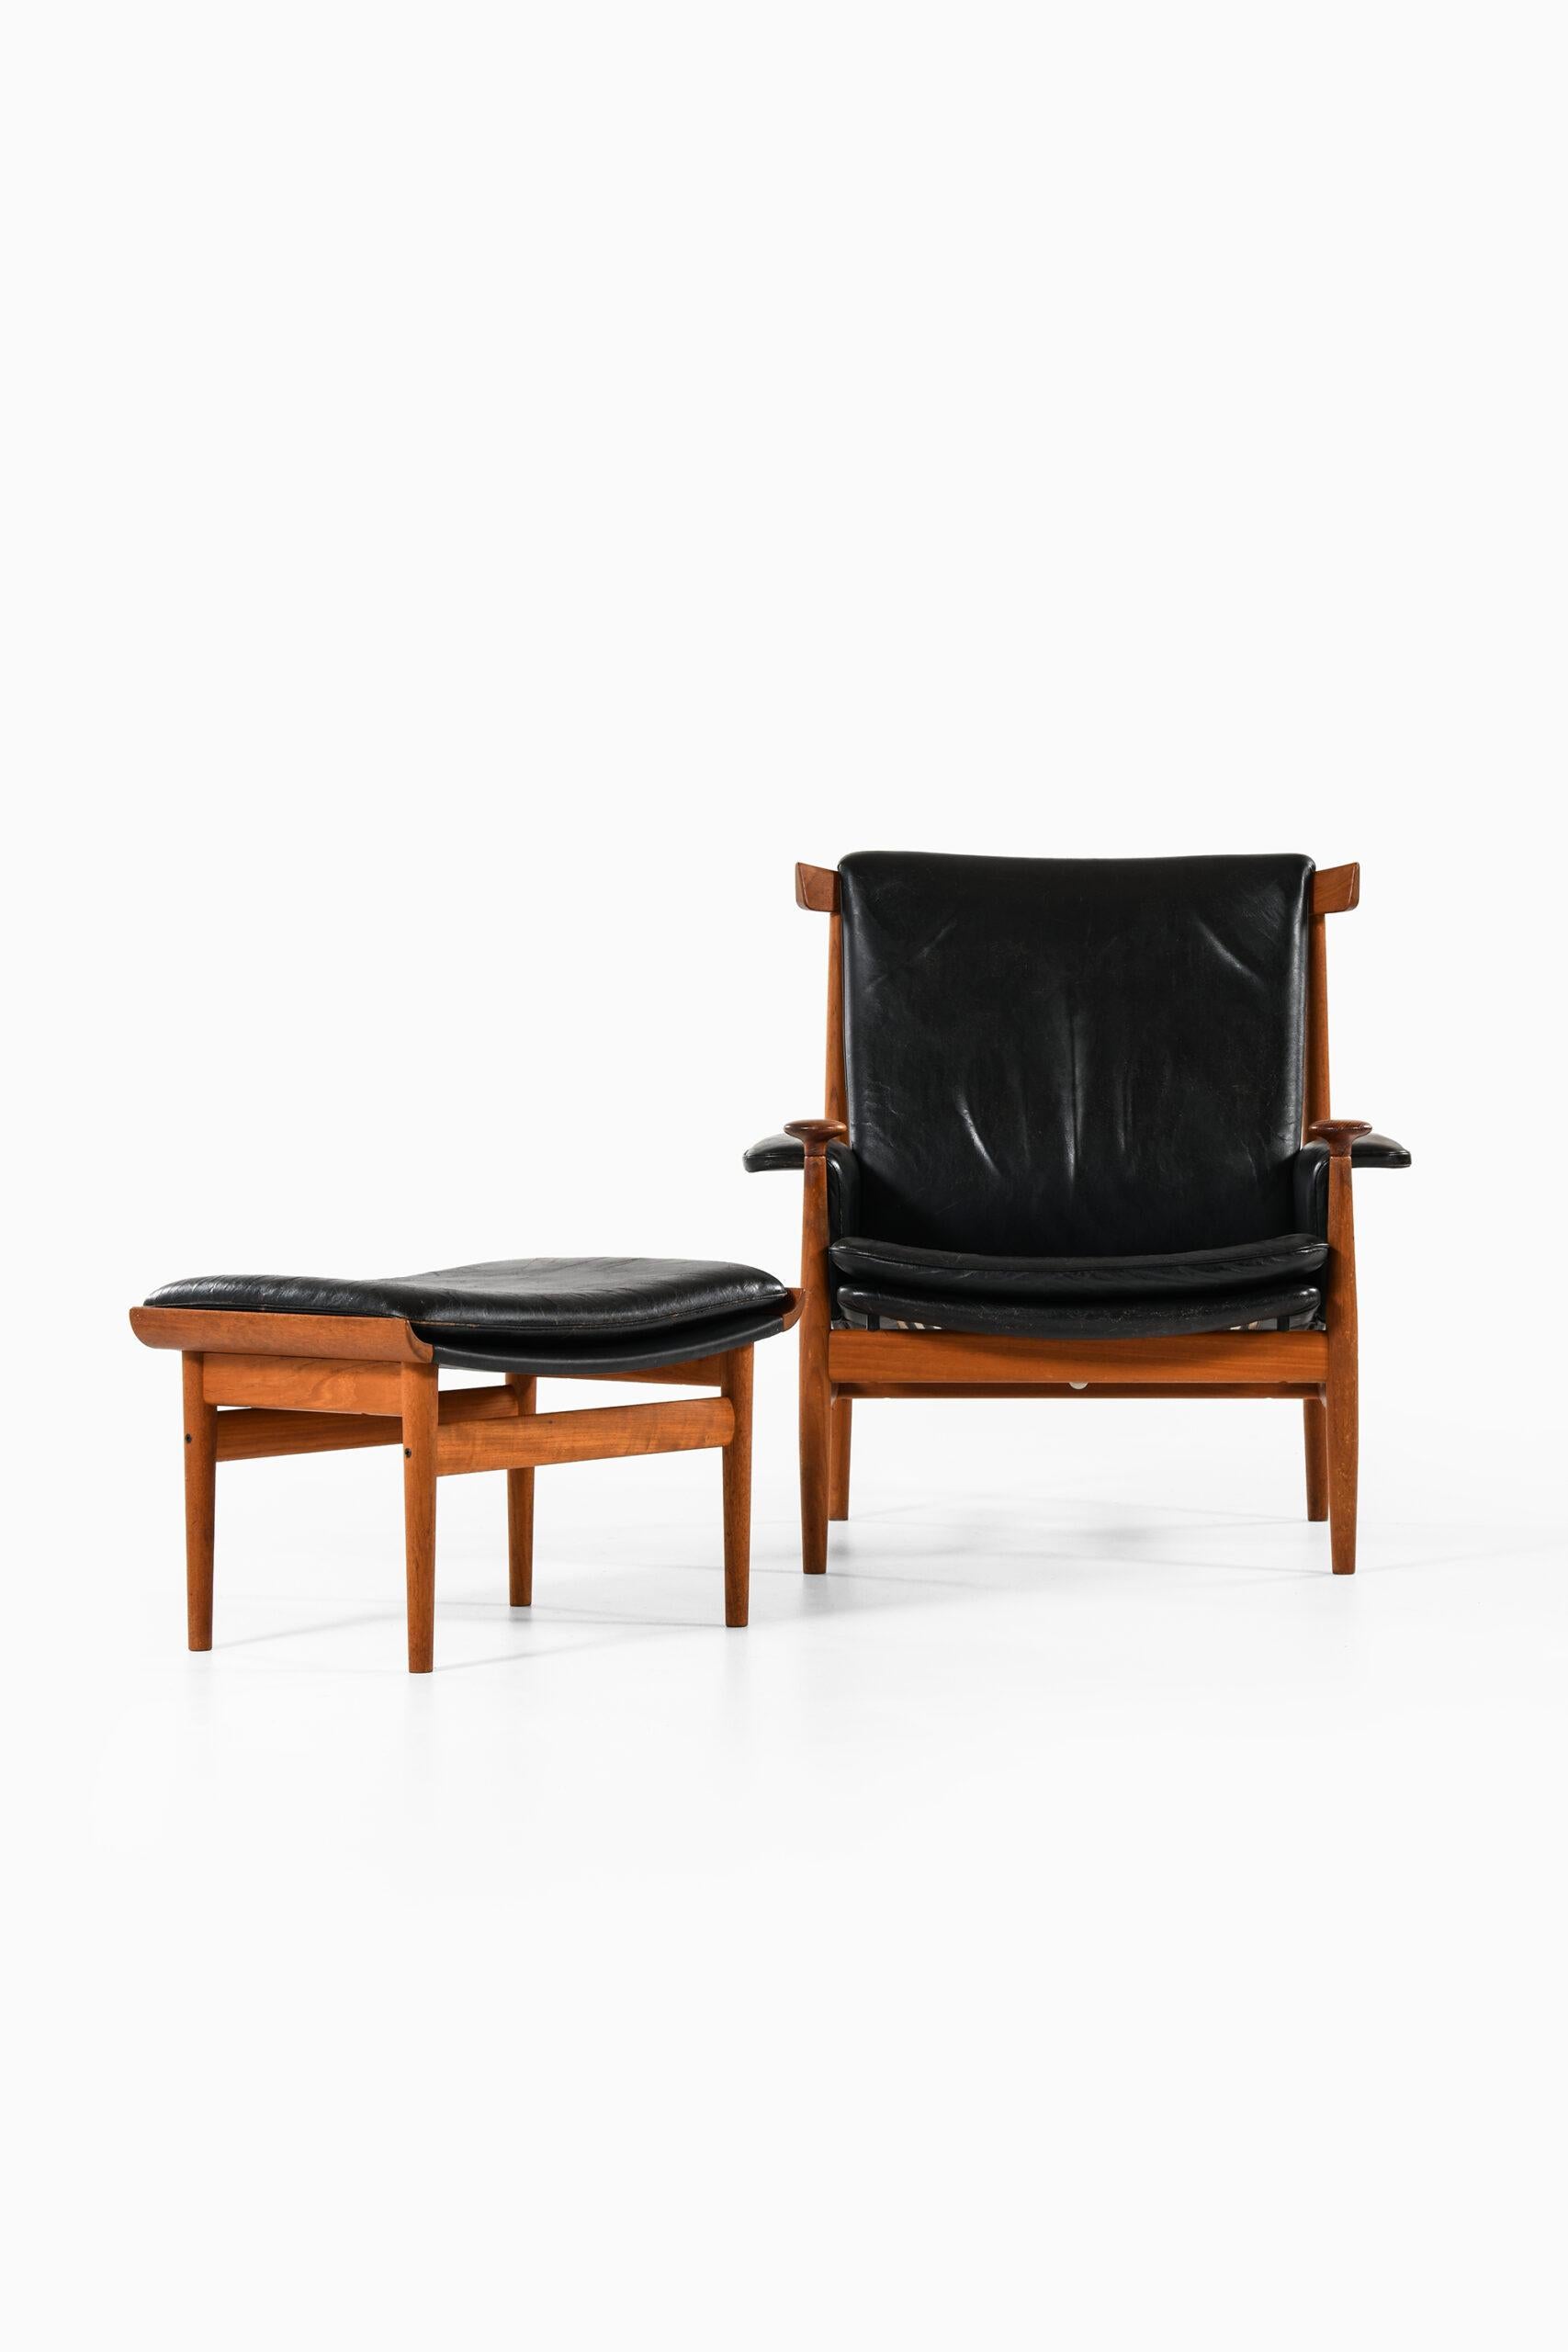 Mid-20th Century Finn Juhl Easy Chair with Stool Model Bwana Produced by France & Daverkosen For Sale